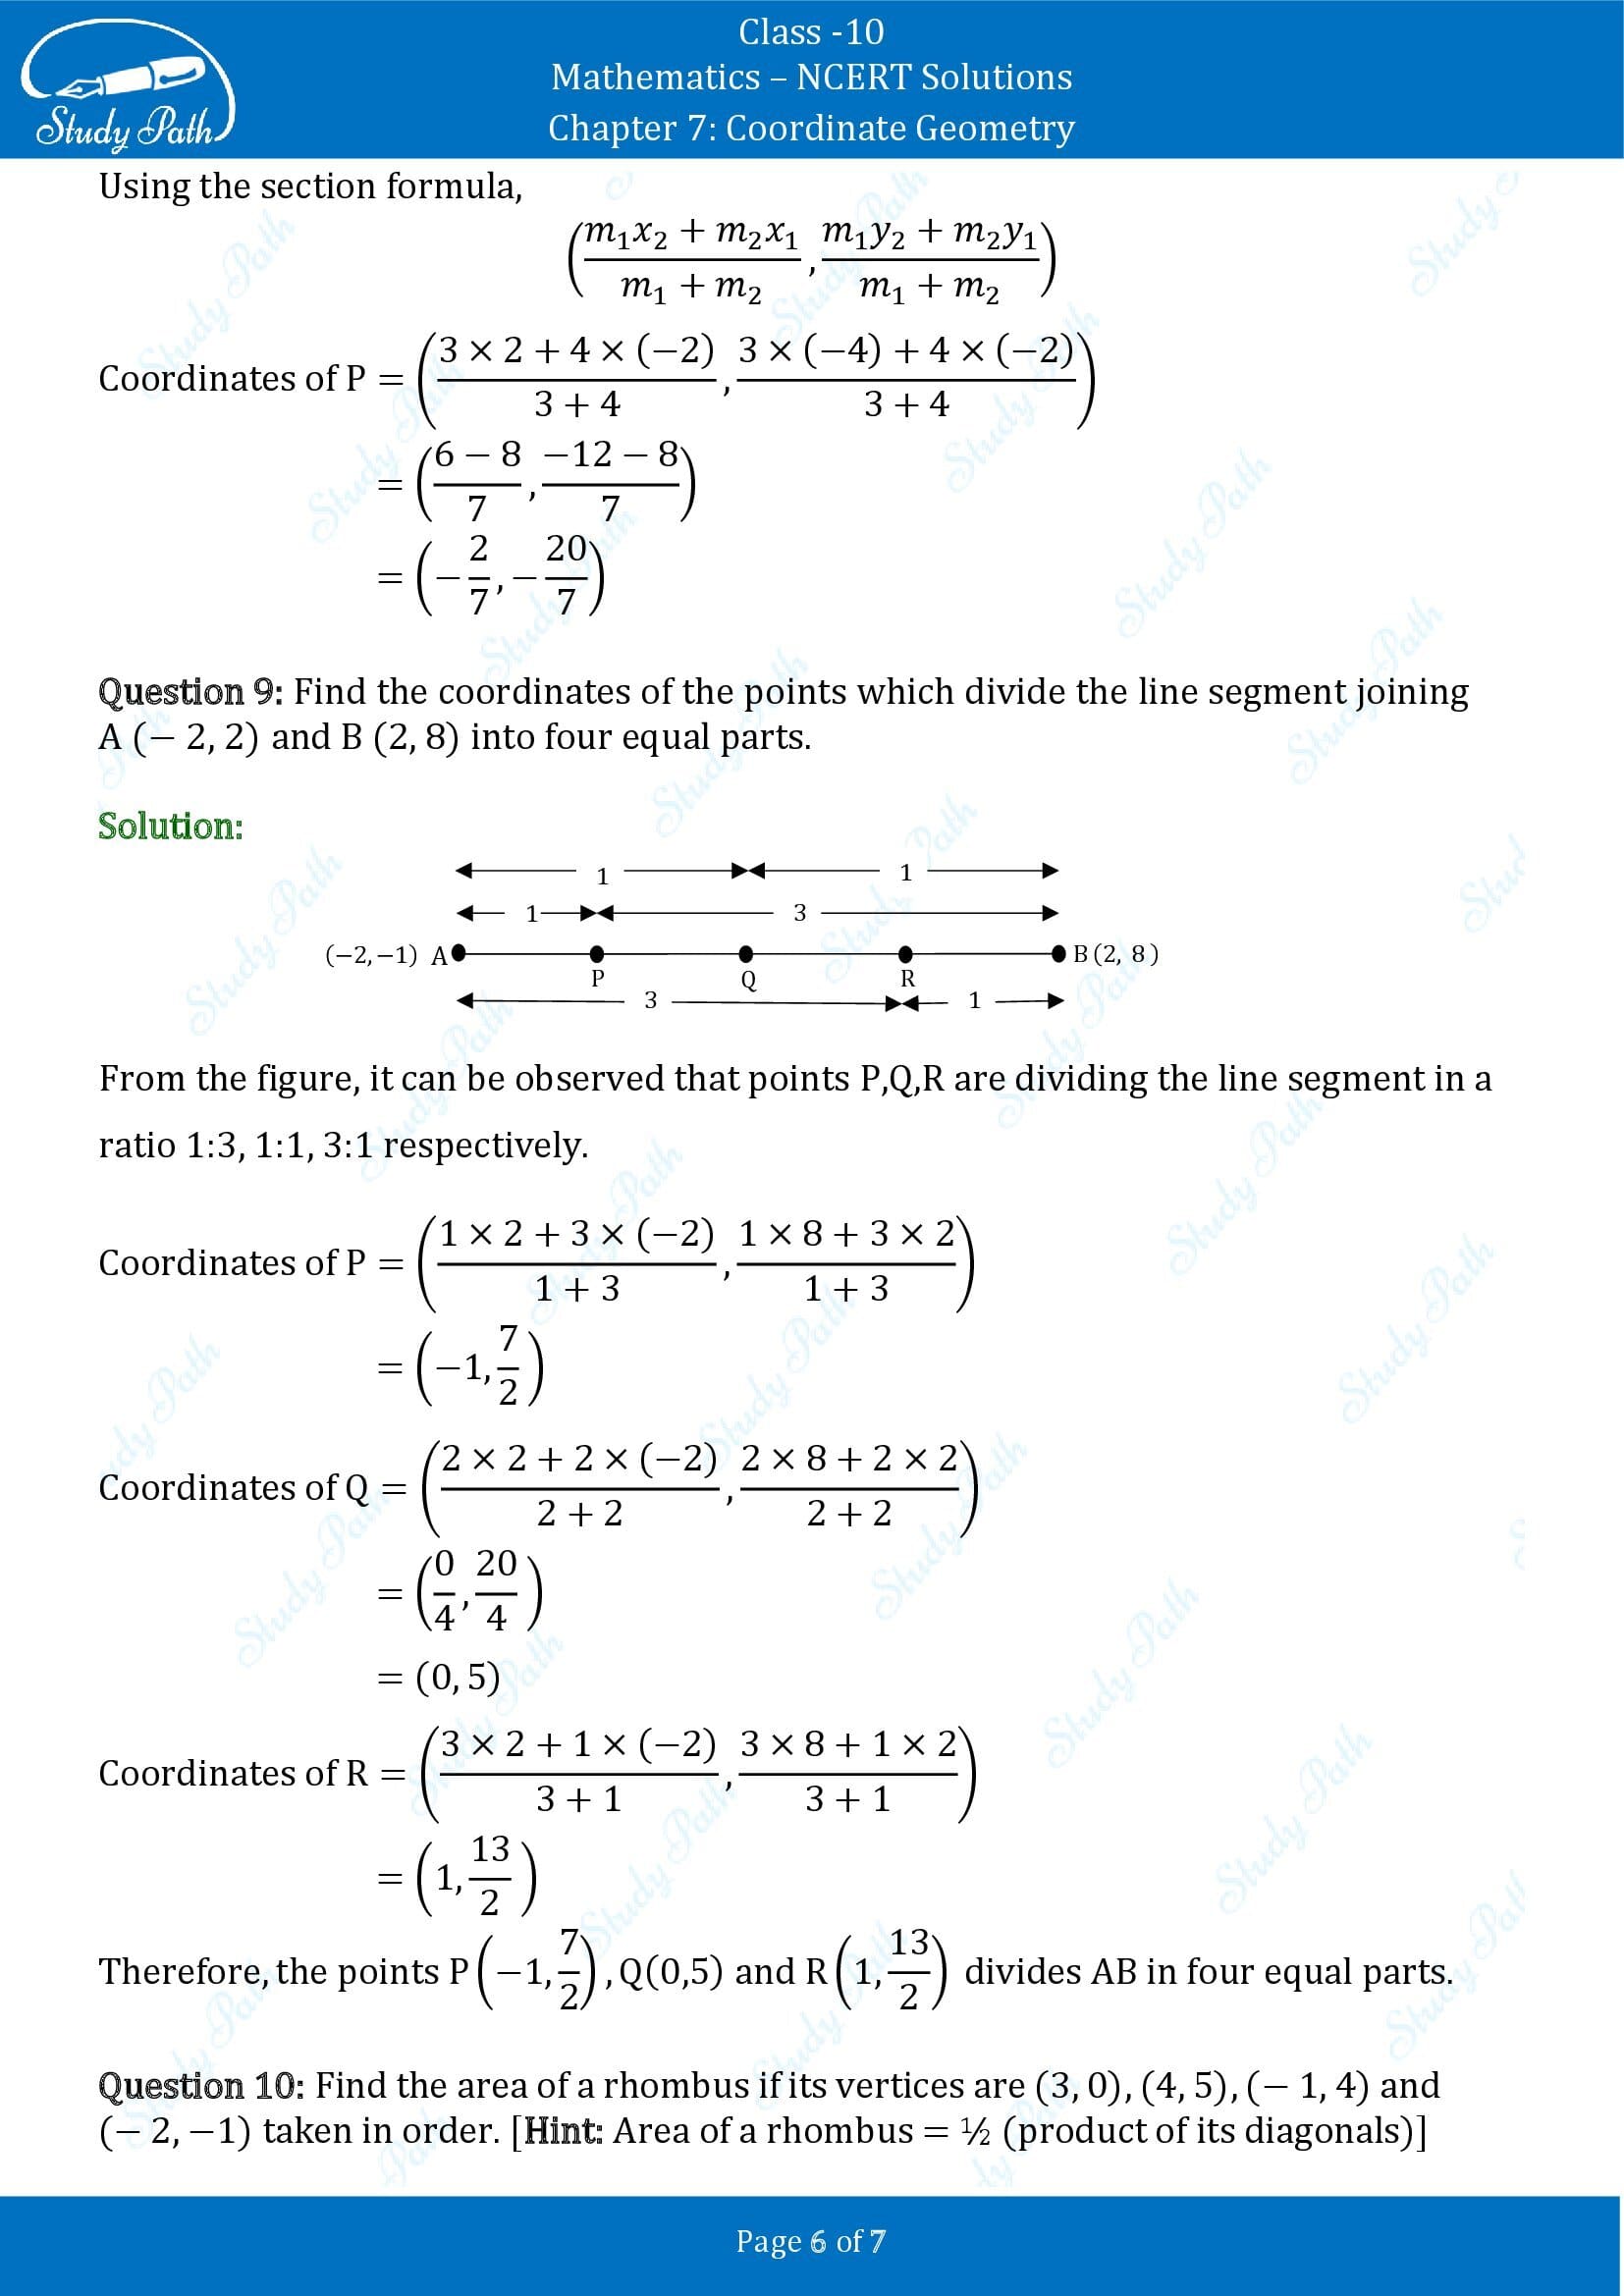 NCERT Solutions for Class 10 Maths Chapter 7 Coordinate Geometry Exercise 7.2 00006